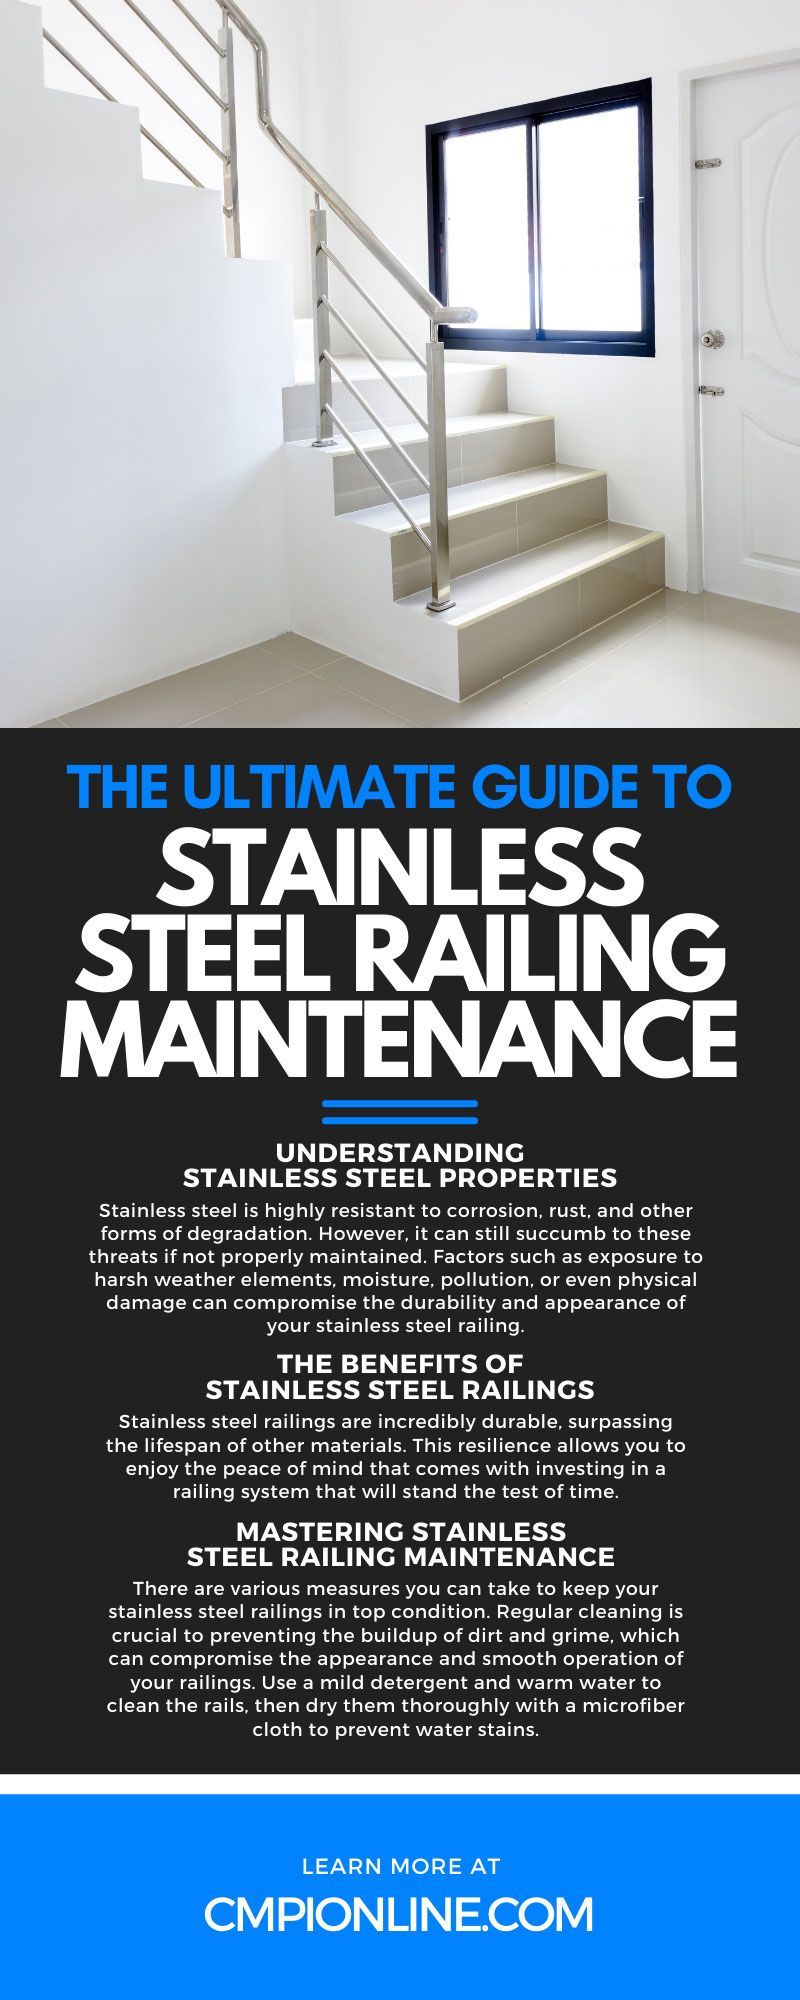 The Ultimate Guide to Stainless Steel Railing Maintenance